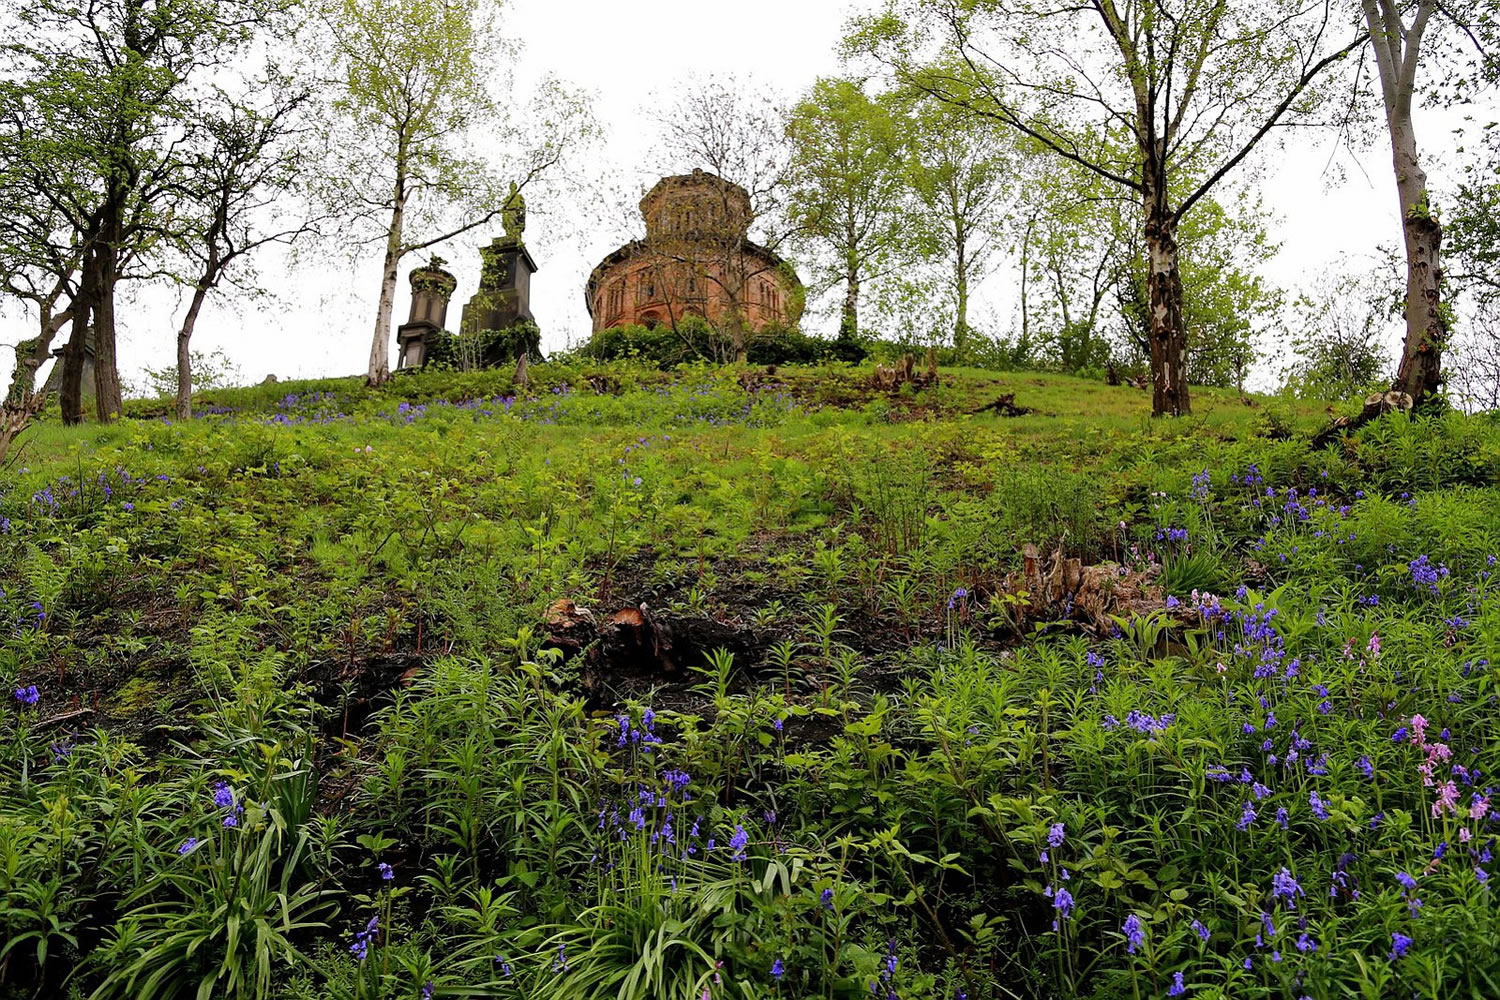 Bluebells in bloom at Glasgow's Necropolis, a 37-acre site that is home to thousands of graves in Glasgow, Scotland.